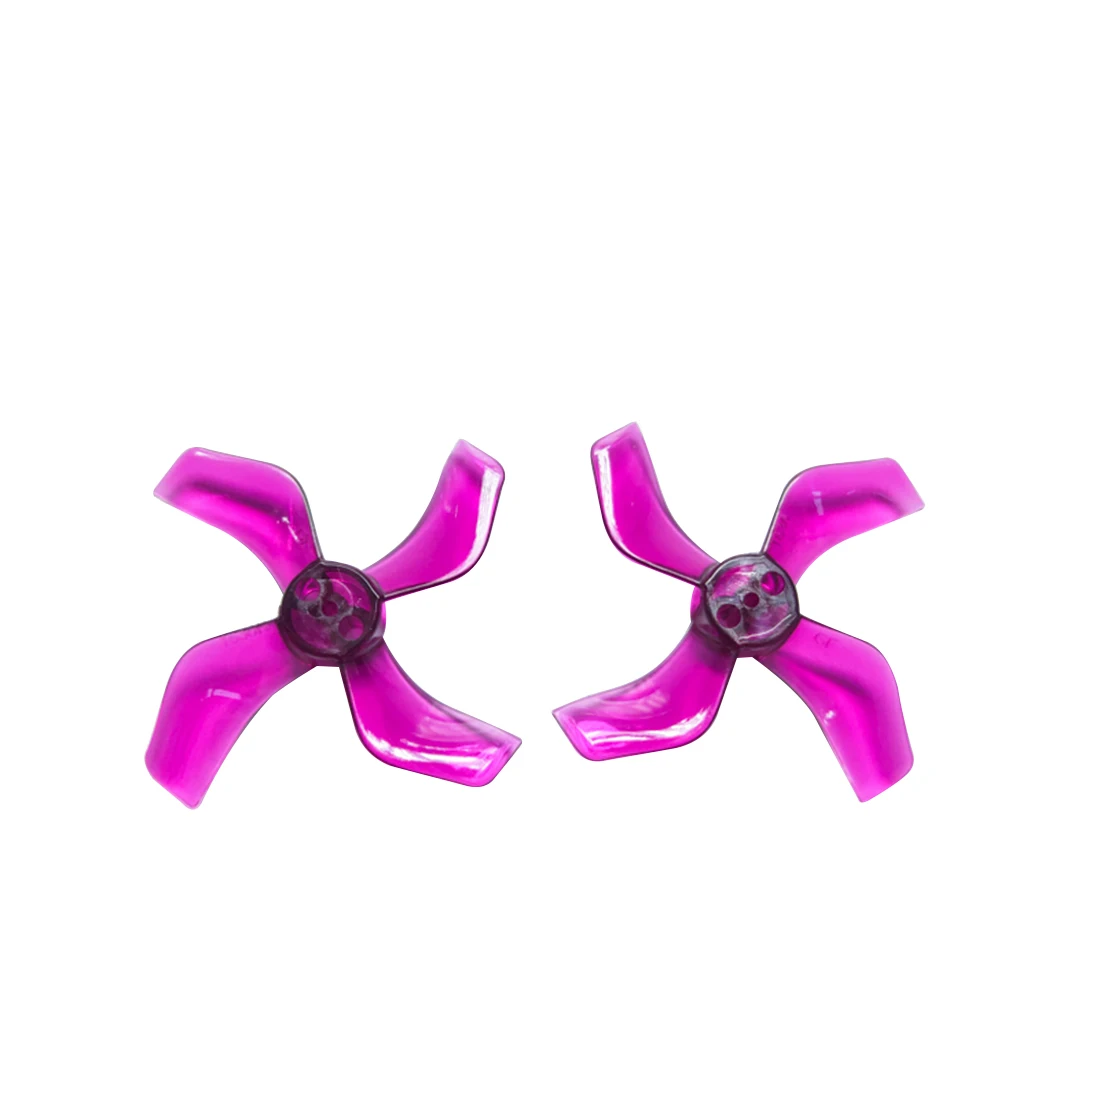 

20 Pairs Gemfan 1636 4-paddle 1.5mm Hole Propeller PC CW CCW Props for 1103-1105 RC Drone Quadcopter FPV Racing Brushless Motor